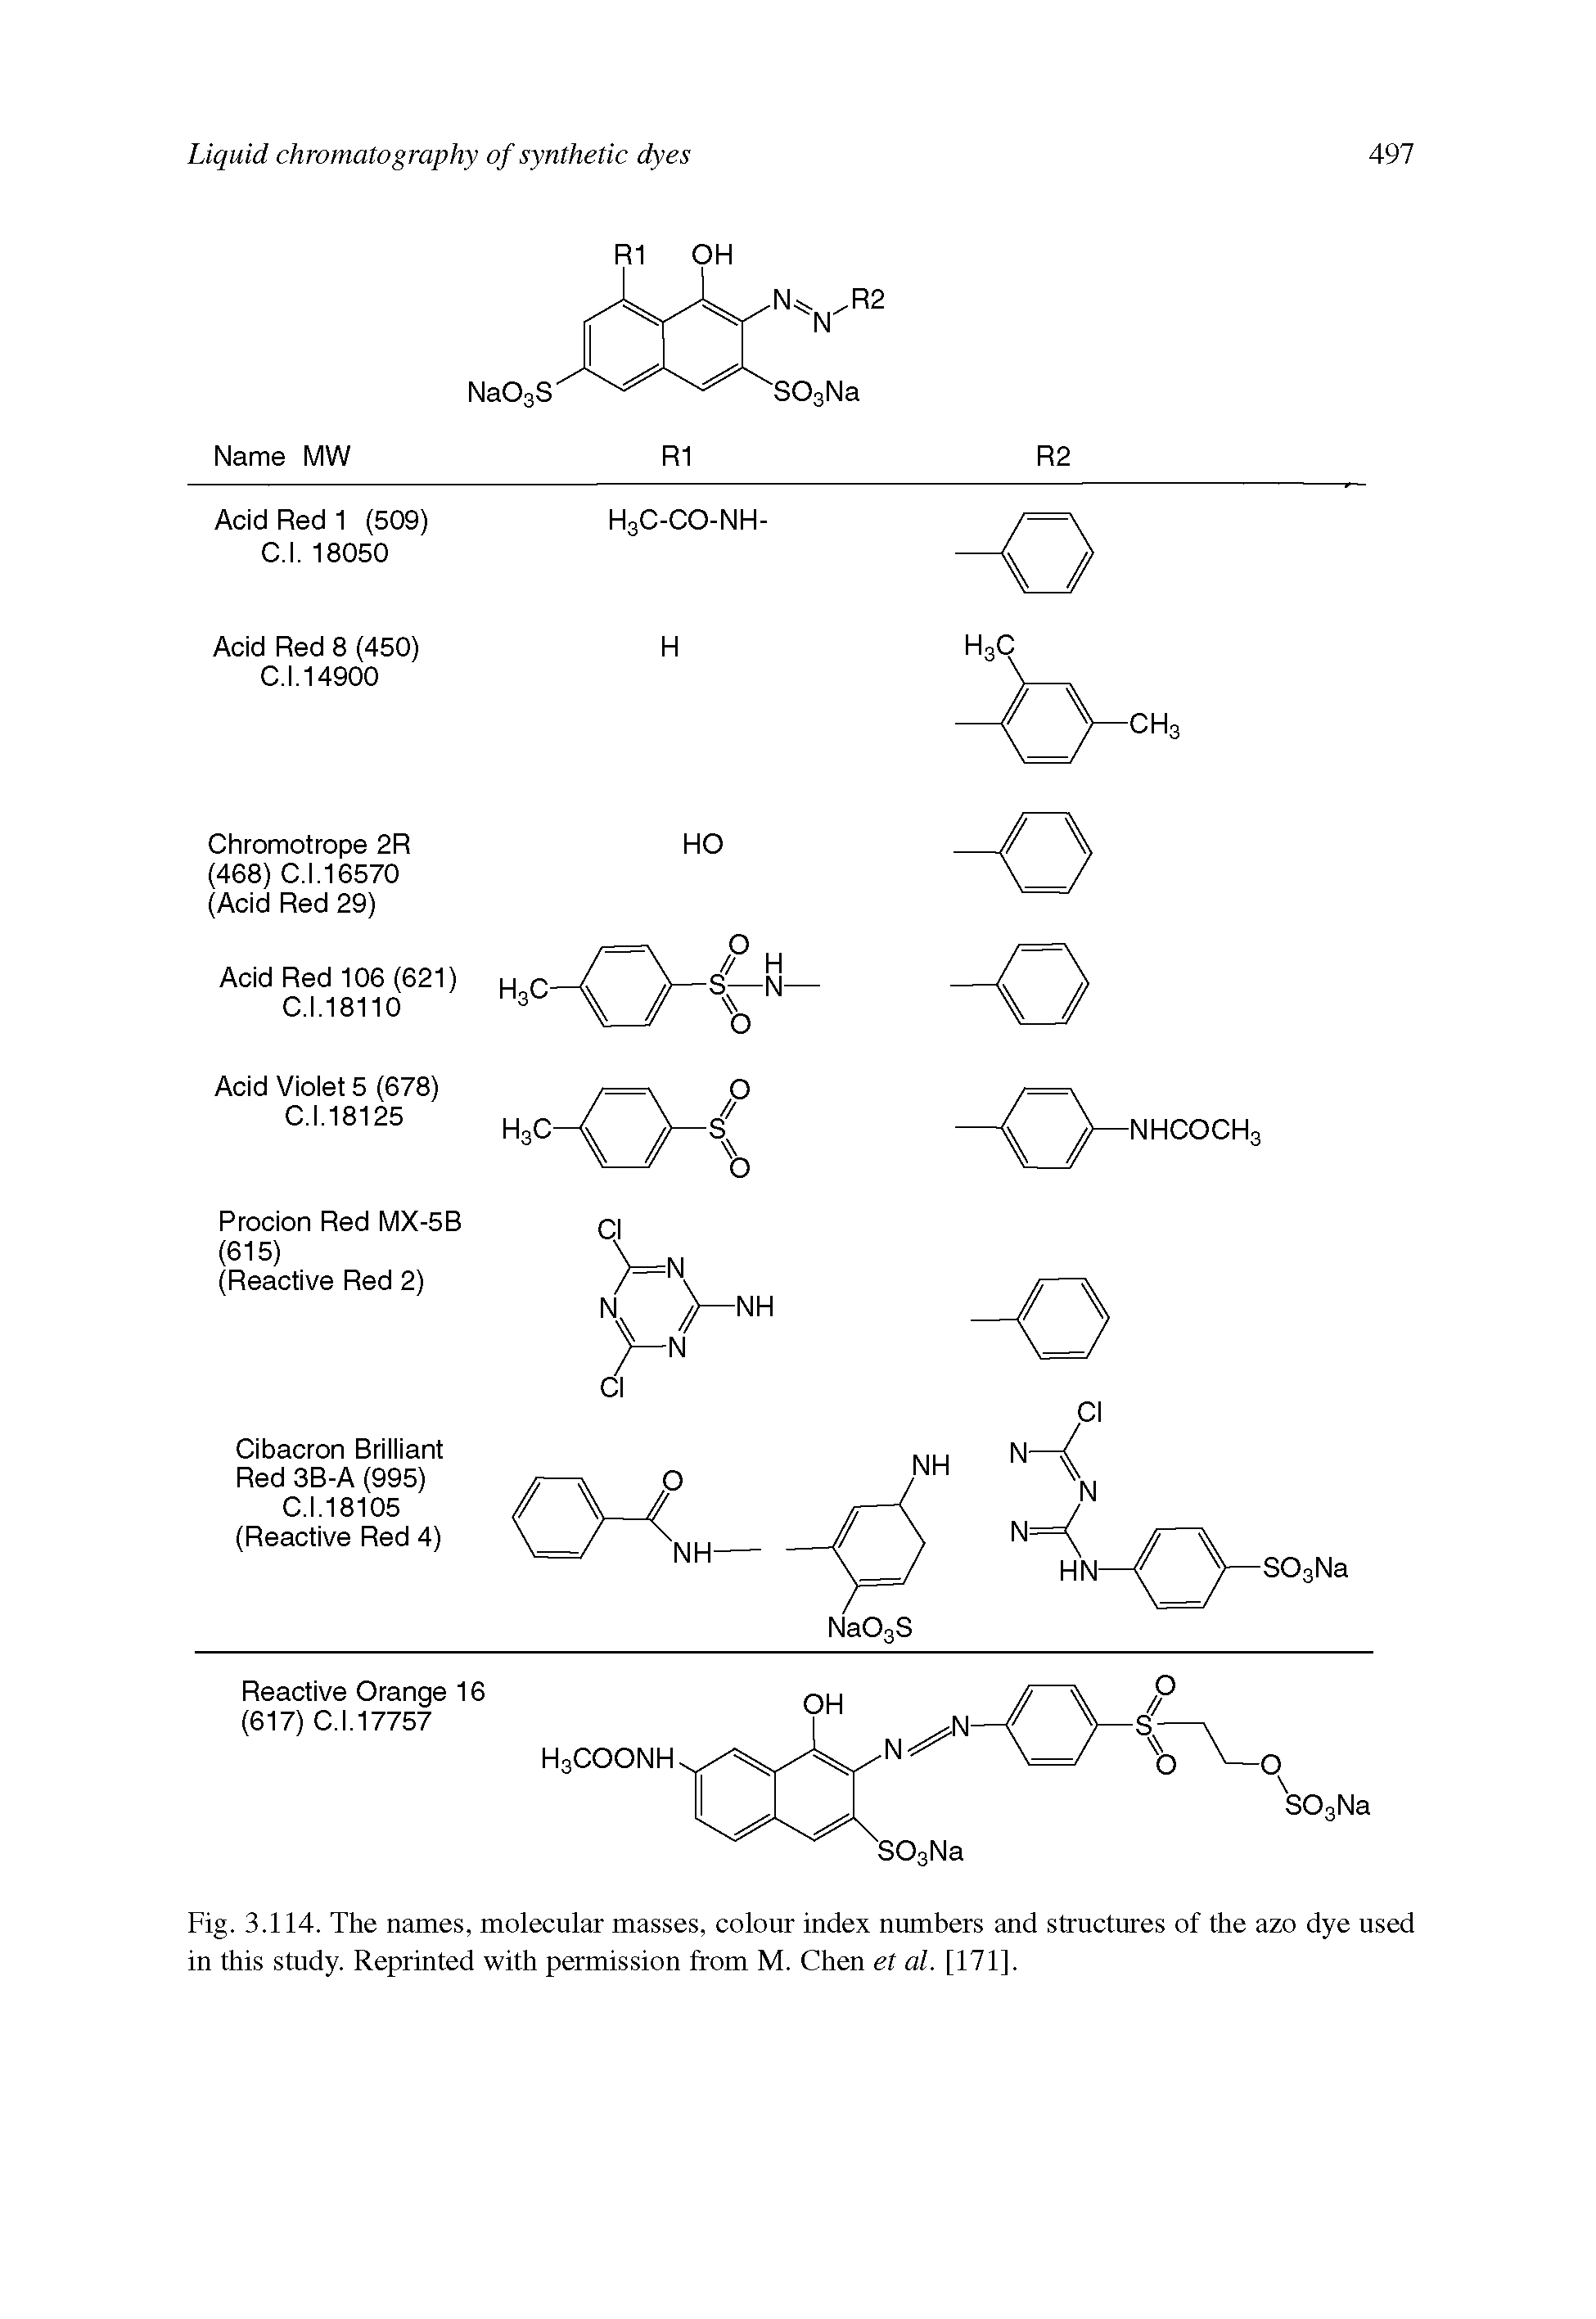 Fig. 3.114. The names, molecular masses, colour index numbers and structures of the azo dye used in this study. Reprinted with permission from M. Chen et al. [171].